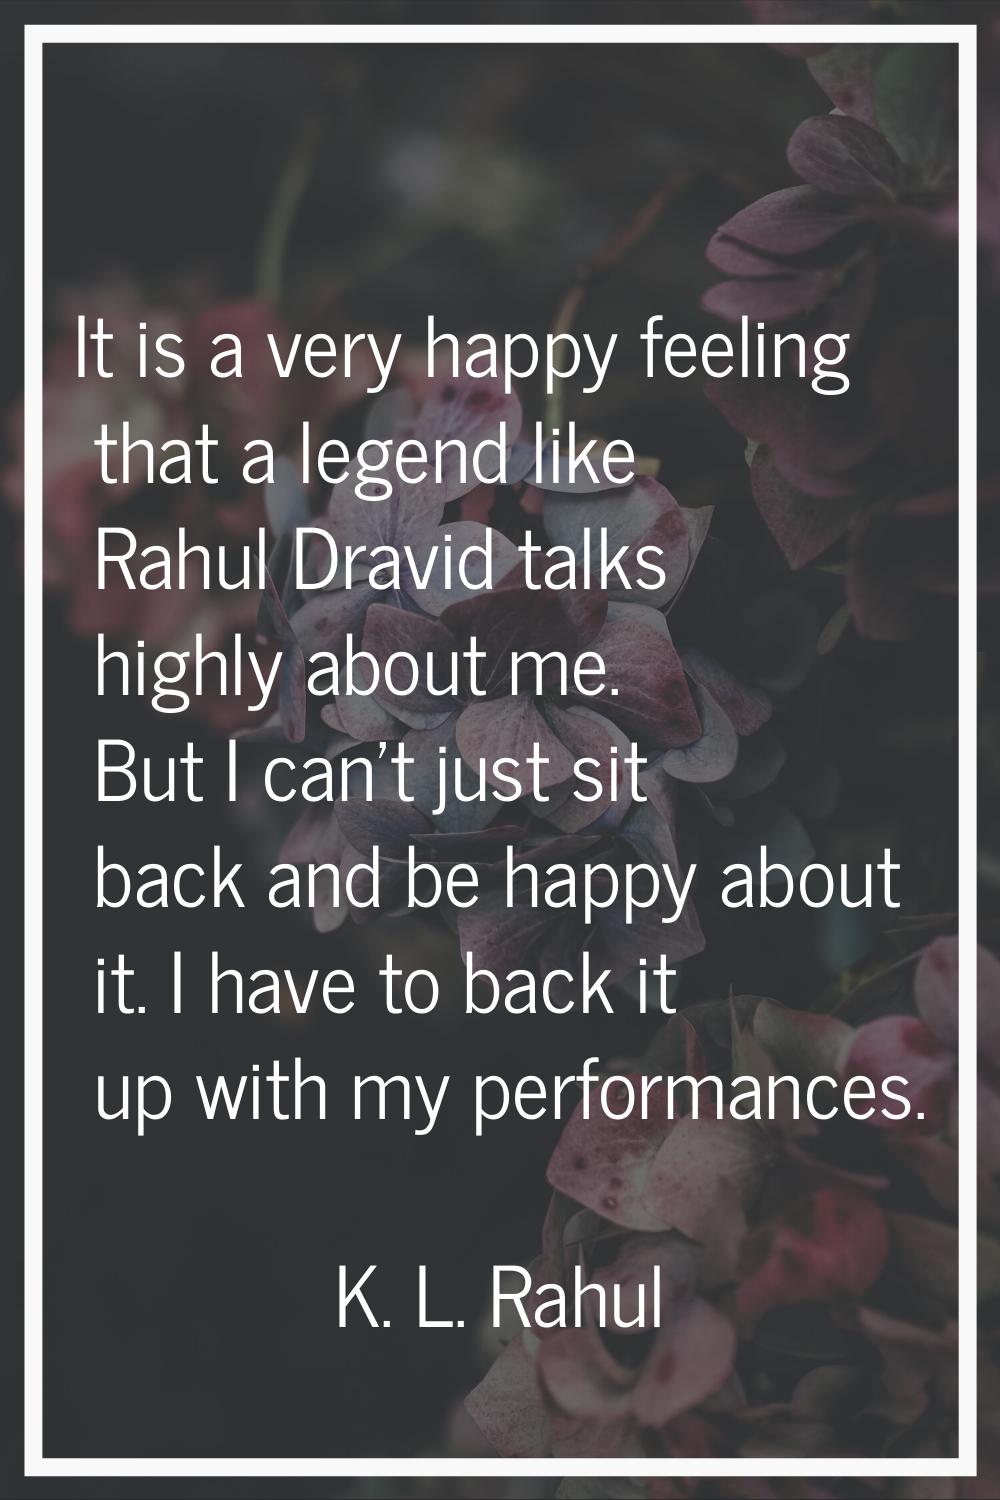 It is a very happy feeling that a legend like Rahul Dravid talks highly about me. But I can't just 